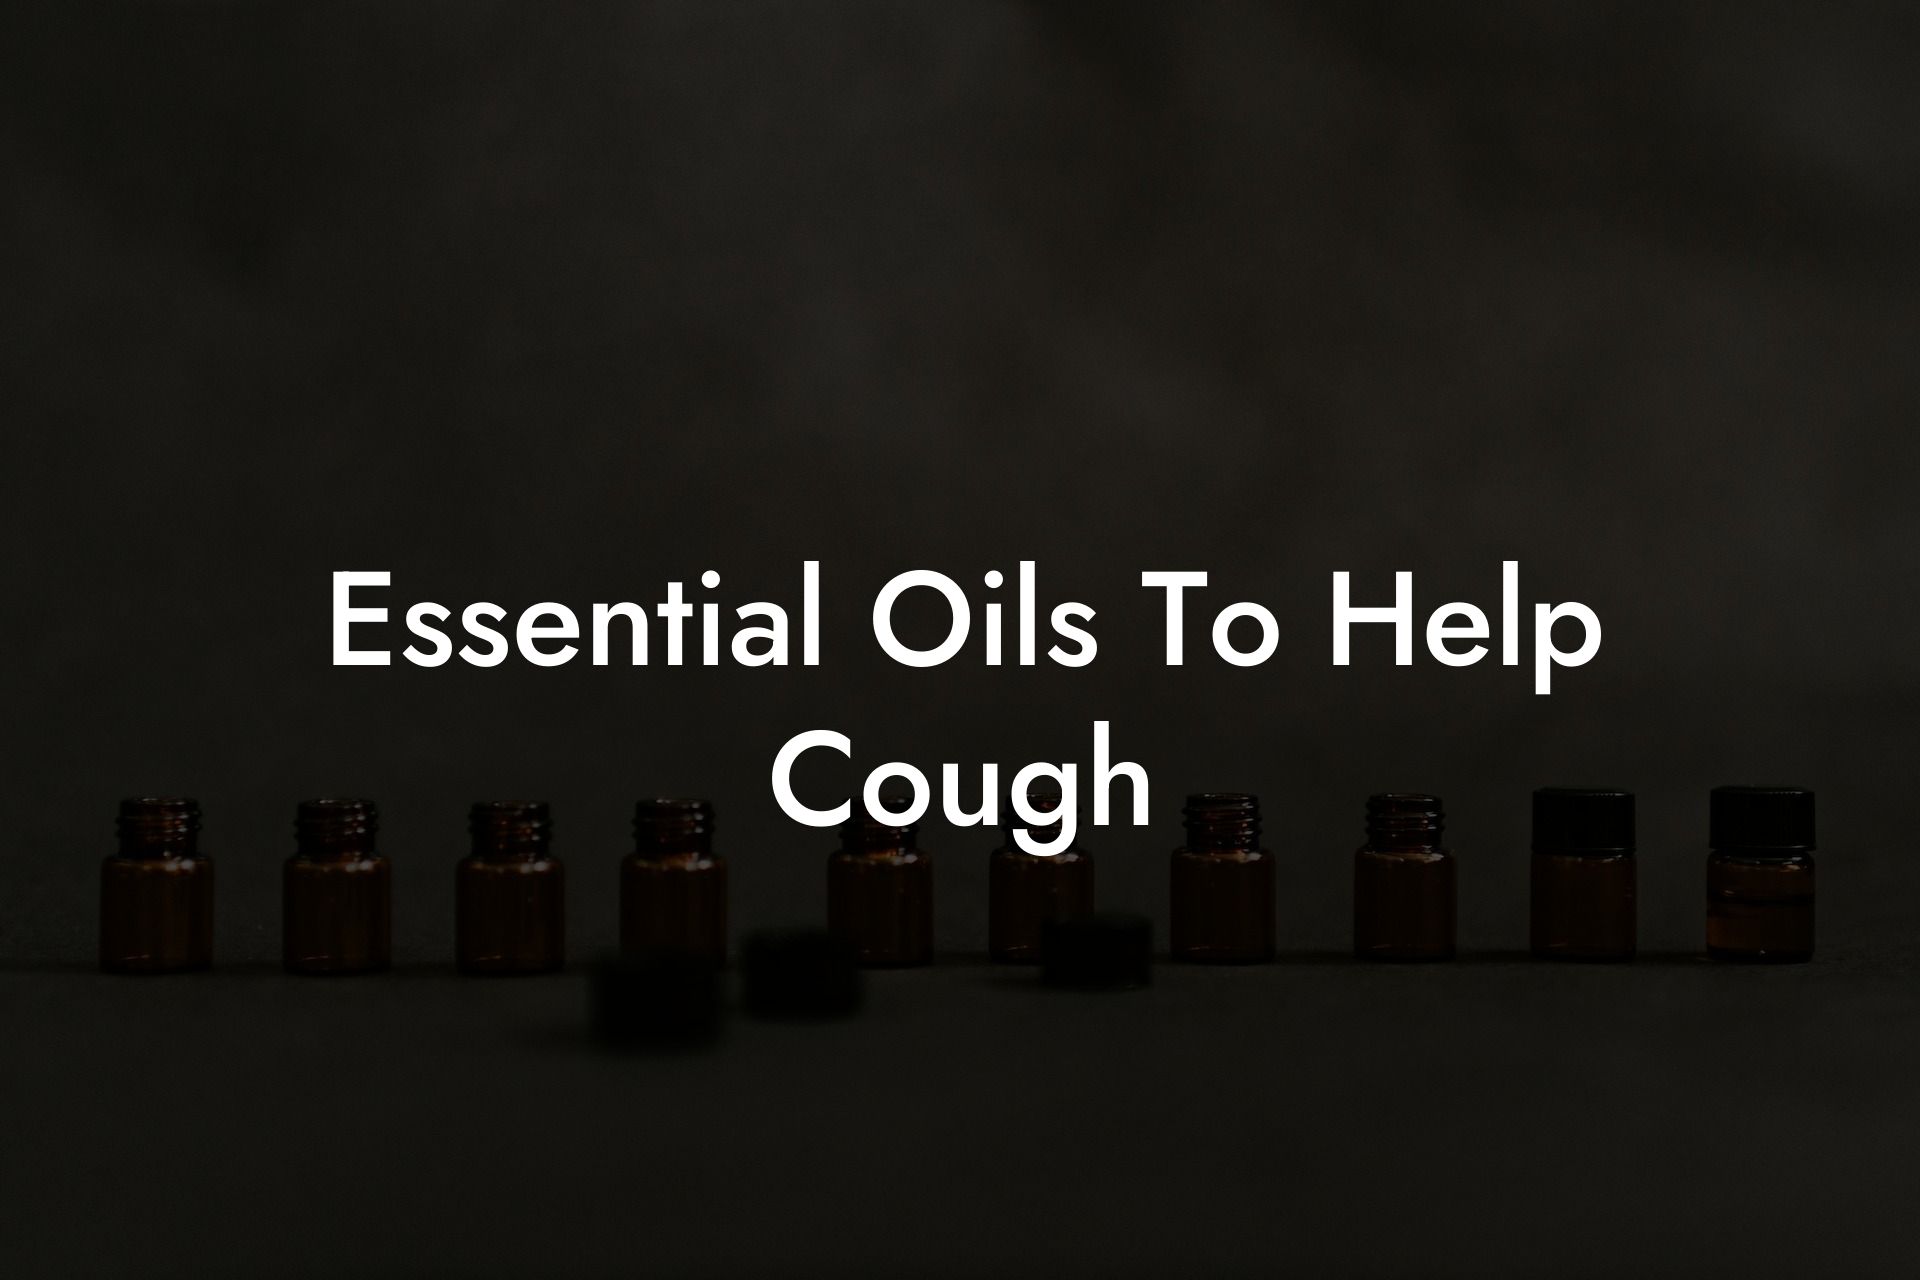 Essential Oils To Help Cough